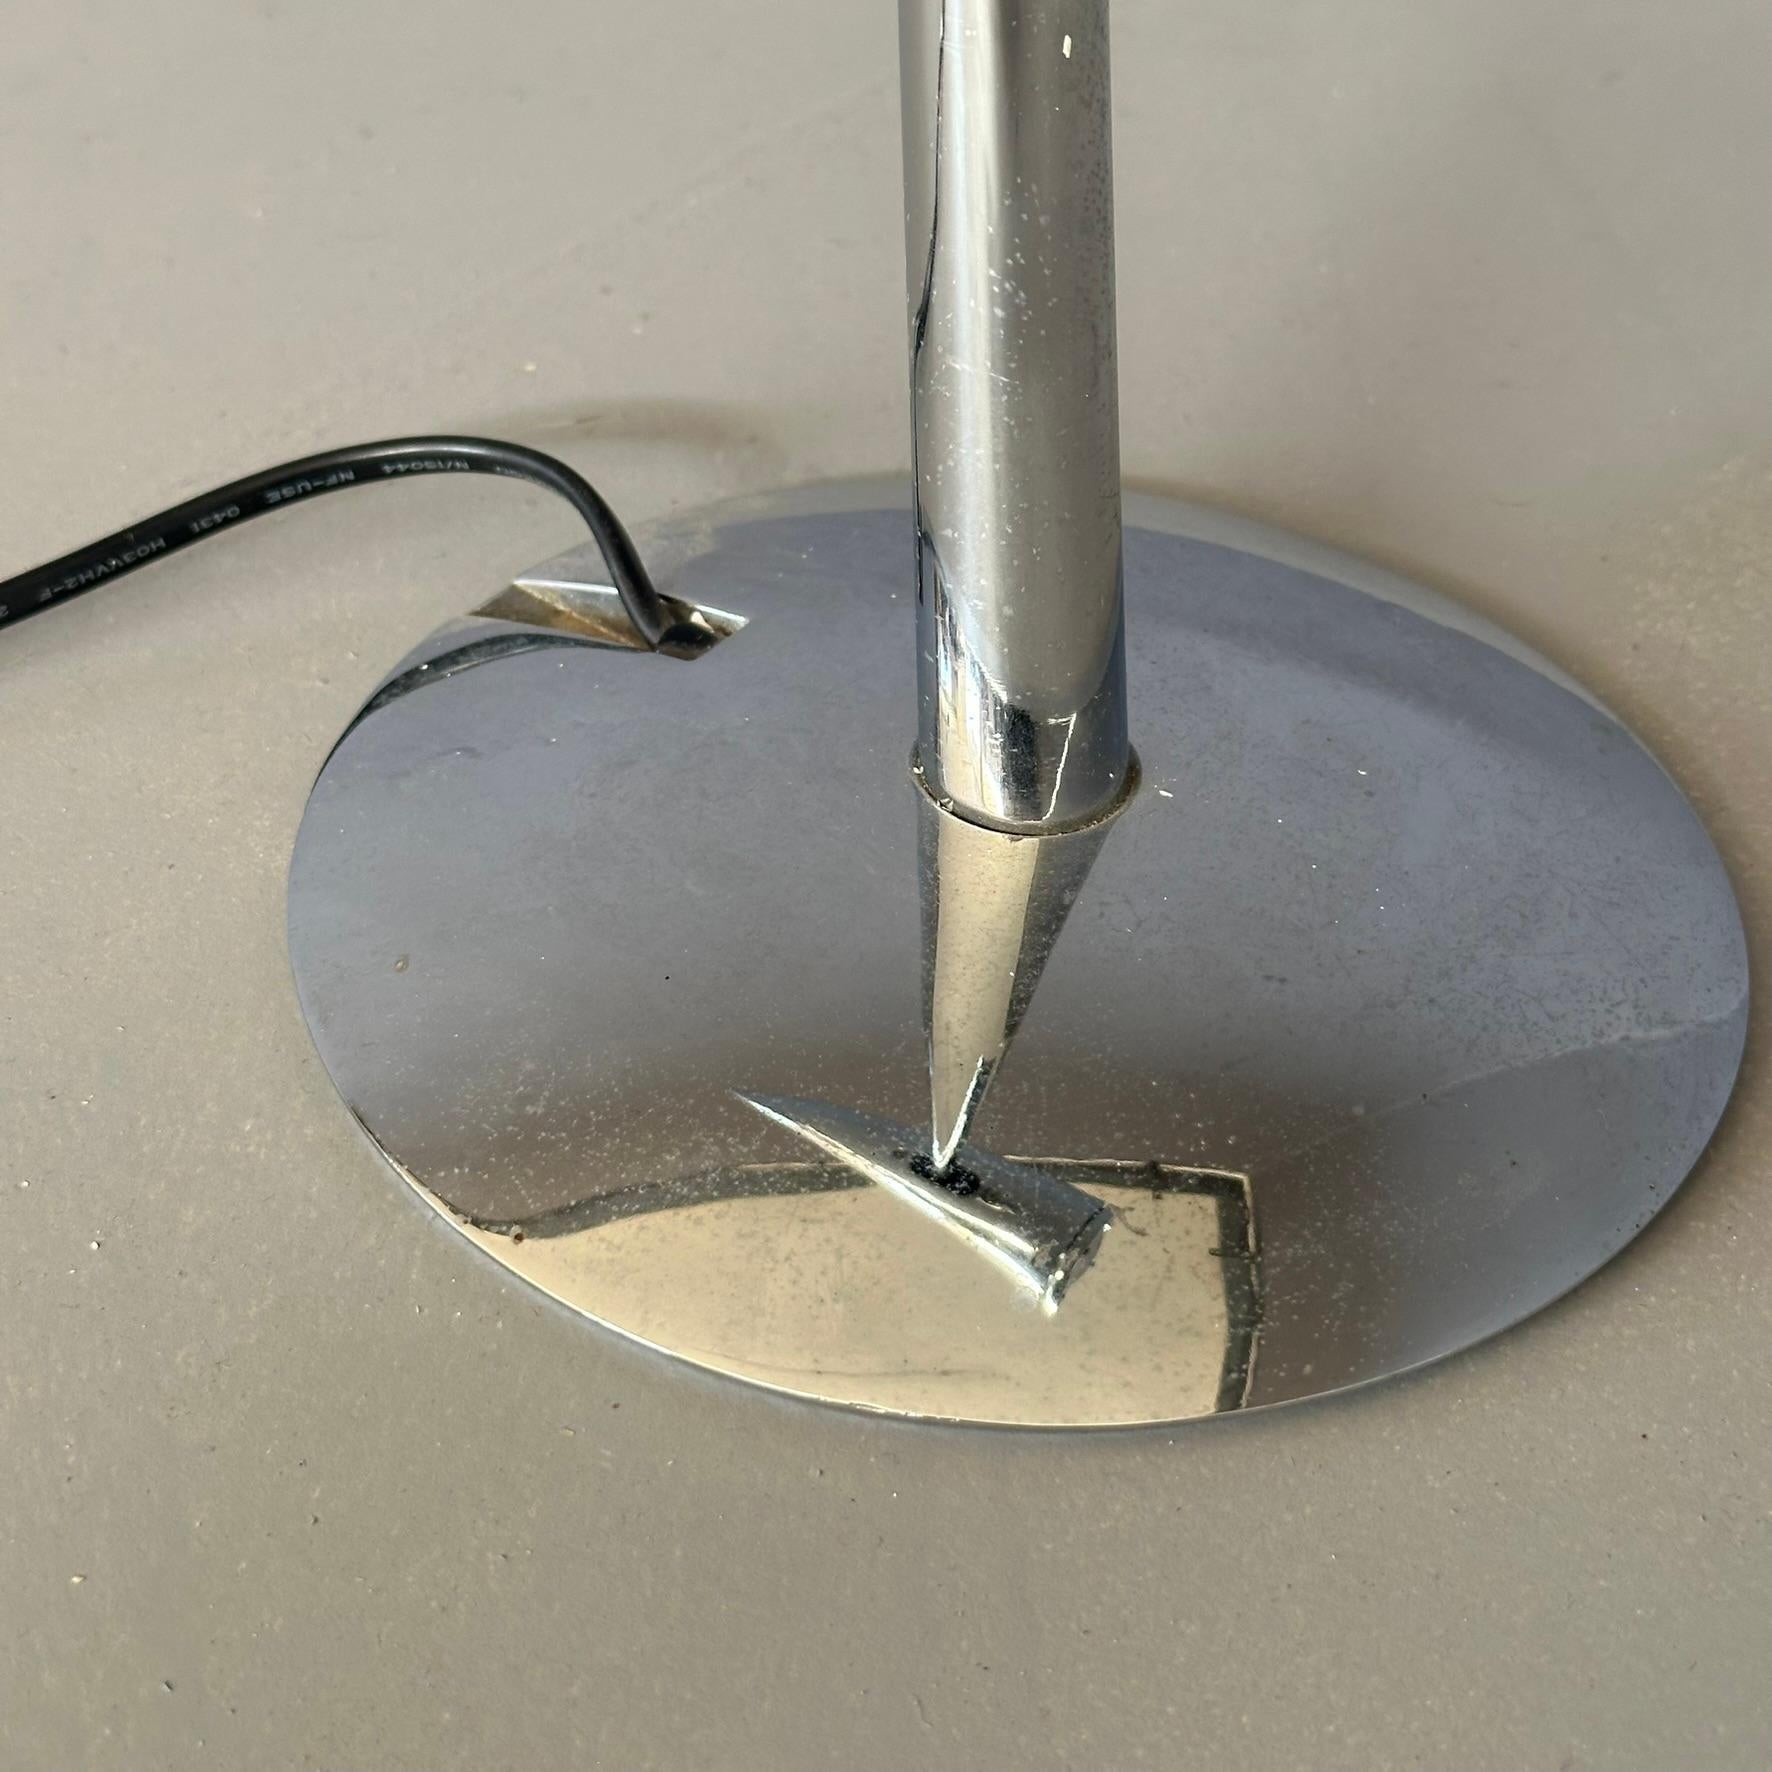 Italian Table Lamp 'ARA', design by Phiiippe Starck for Flos, 1988, chromed steel, works For Sale